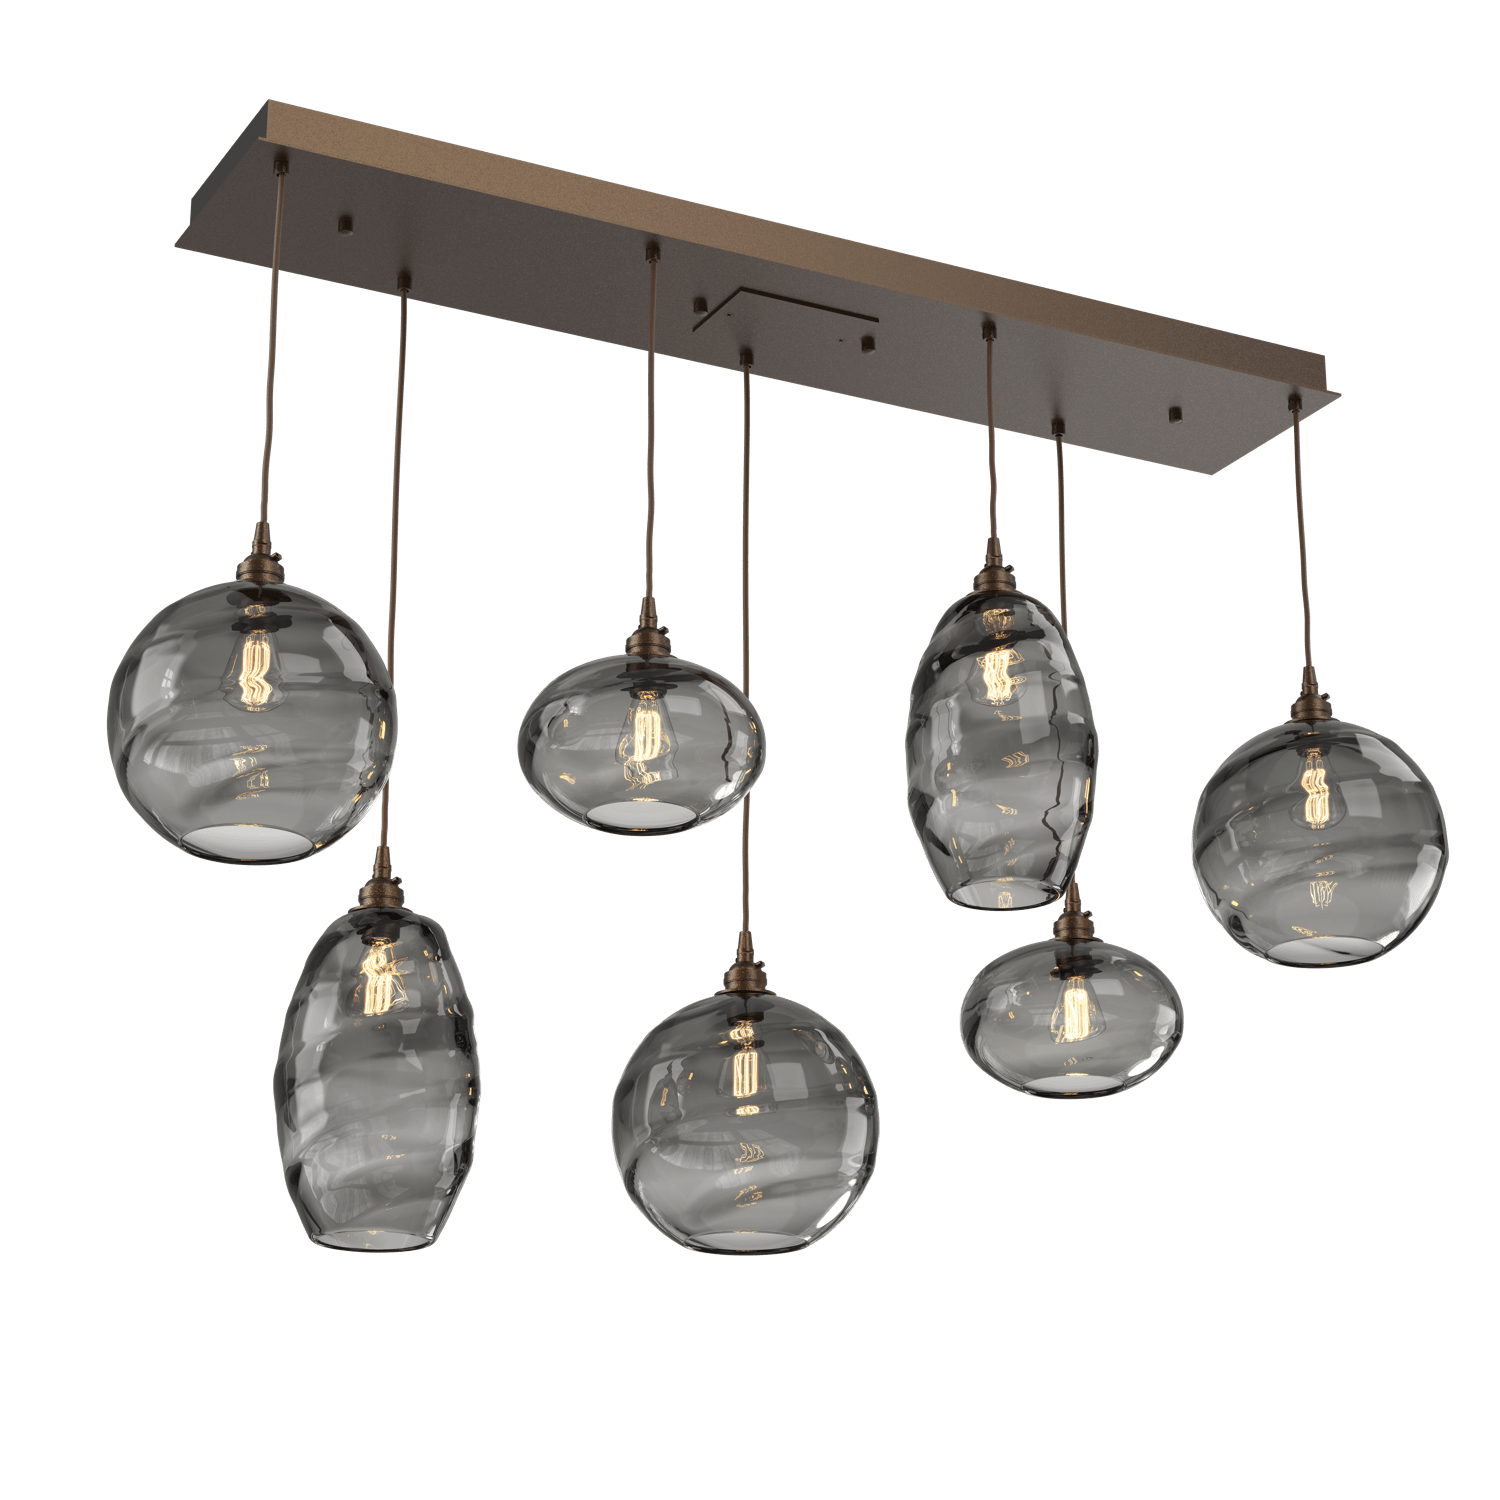 PLB0048-07-FB-OS-Hammerton-Studio-Optic-Blown-Glass-Misto-7-light-linear-pendant-chandelier-with-flat-bronze-finish-and-optic-smoke-blown-glass-shades-and-incandescent-lamping